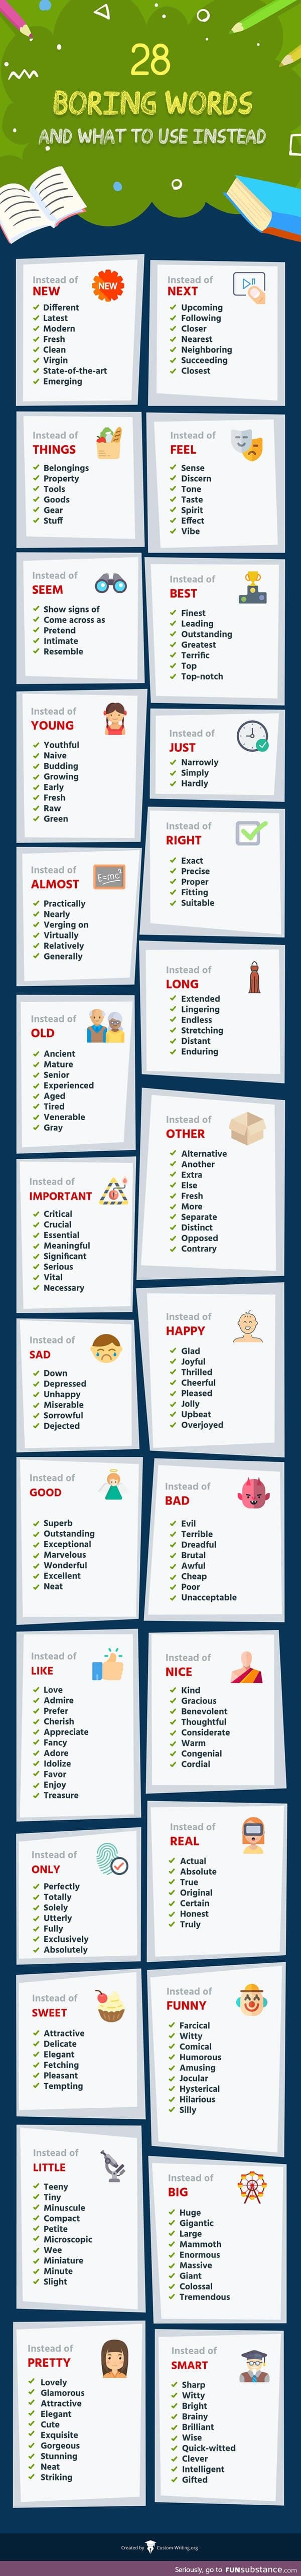 A comprehensive list of boring words and what to use instead!